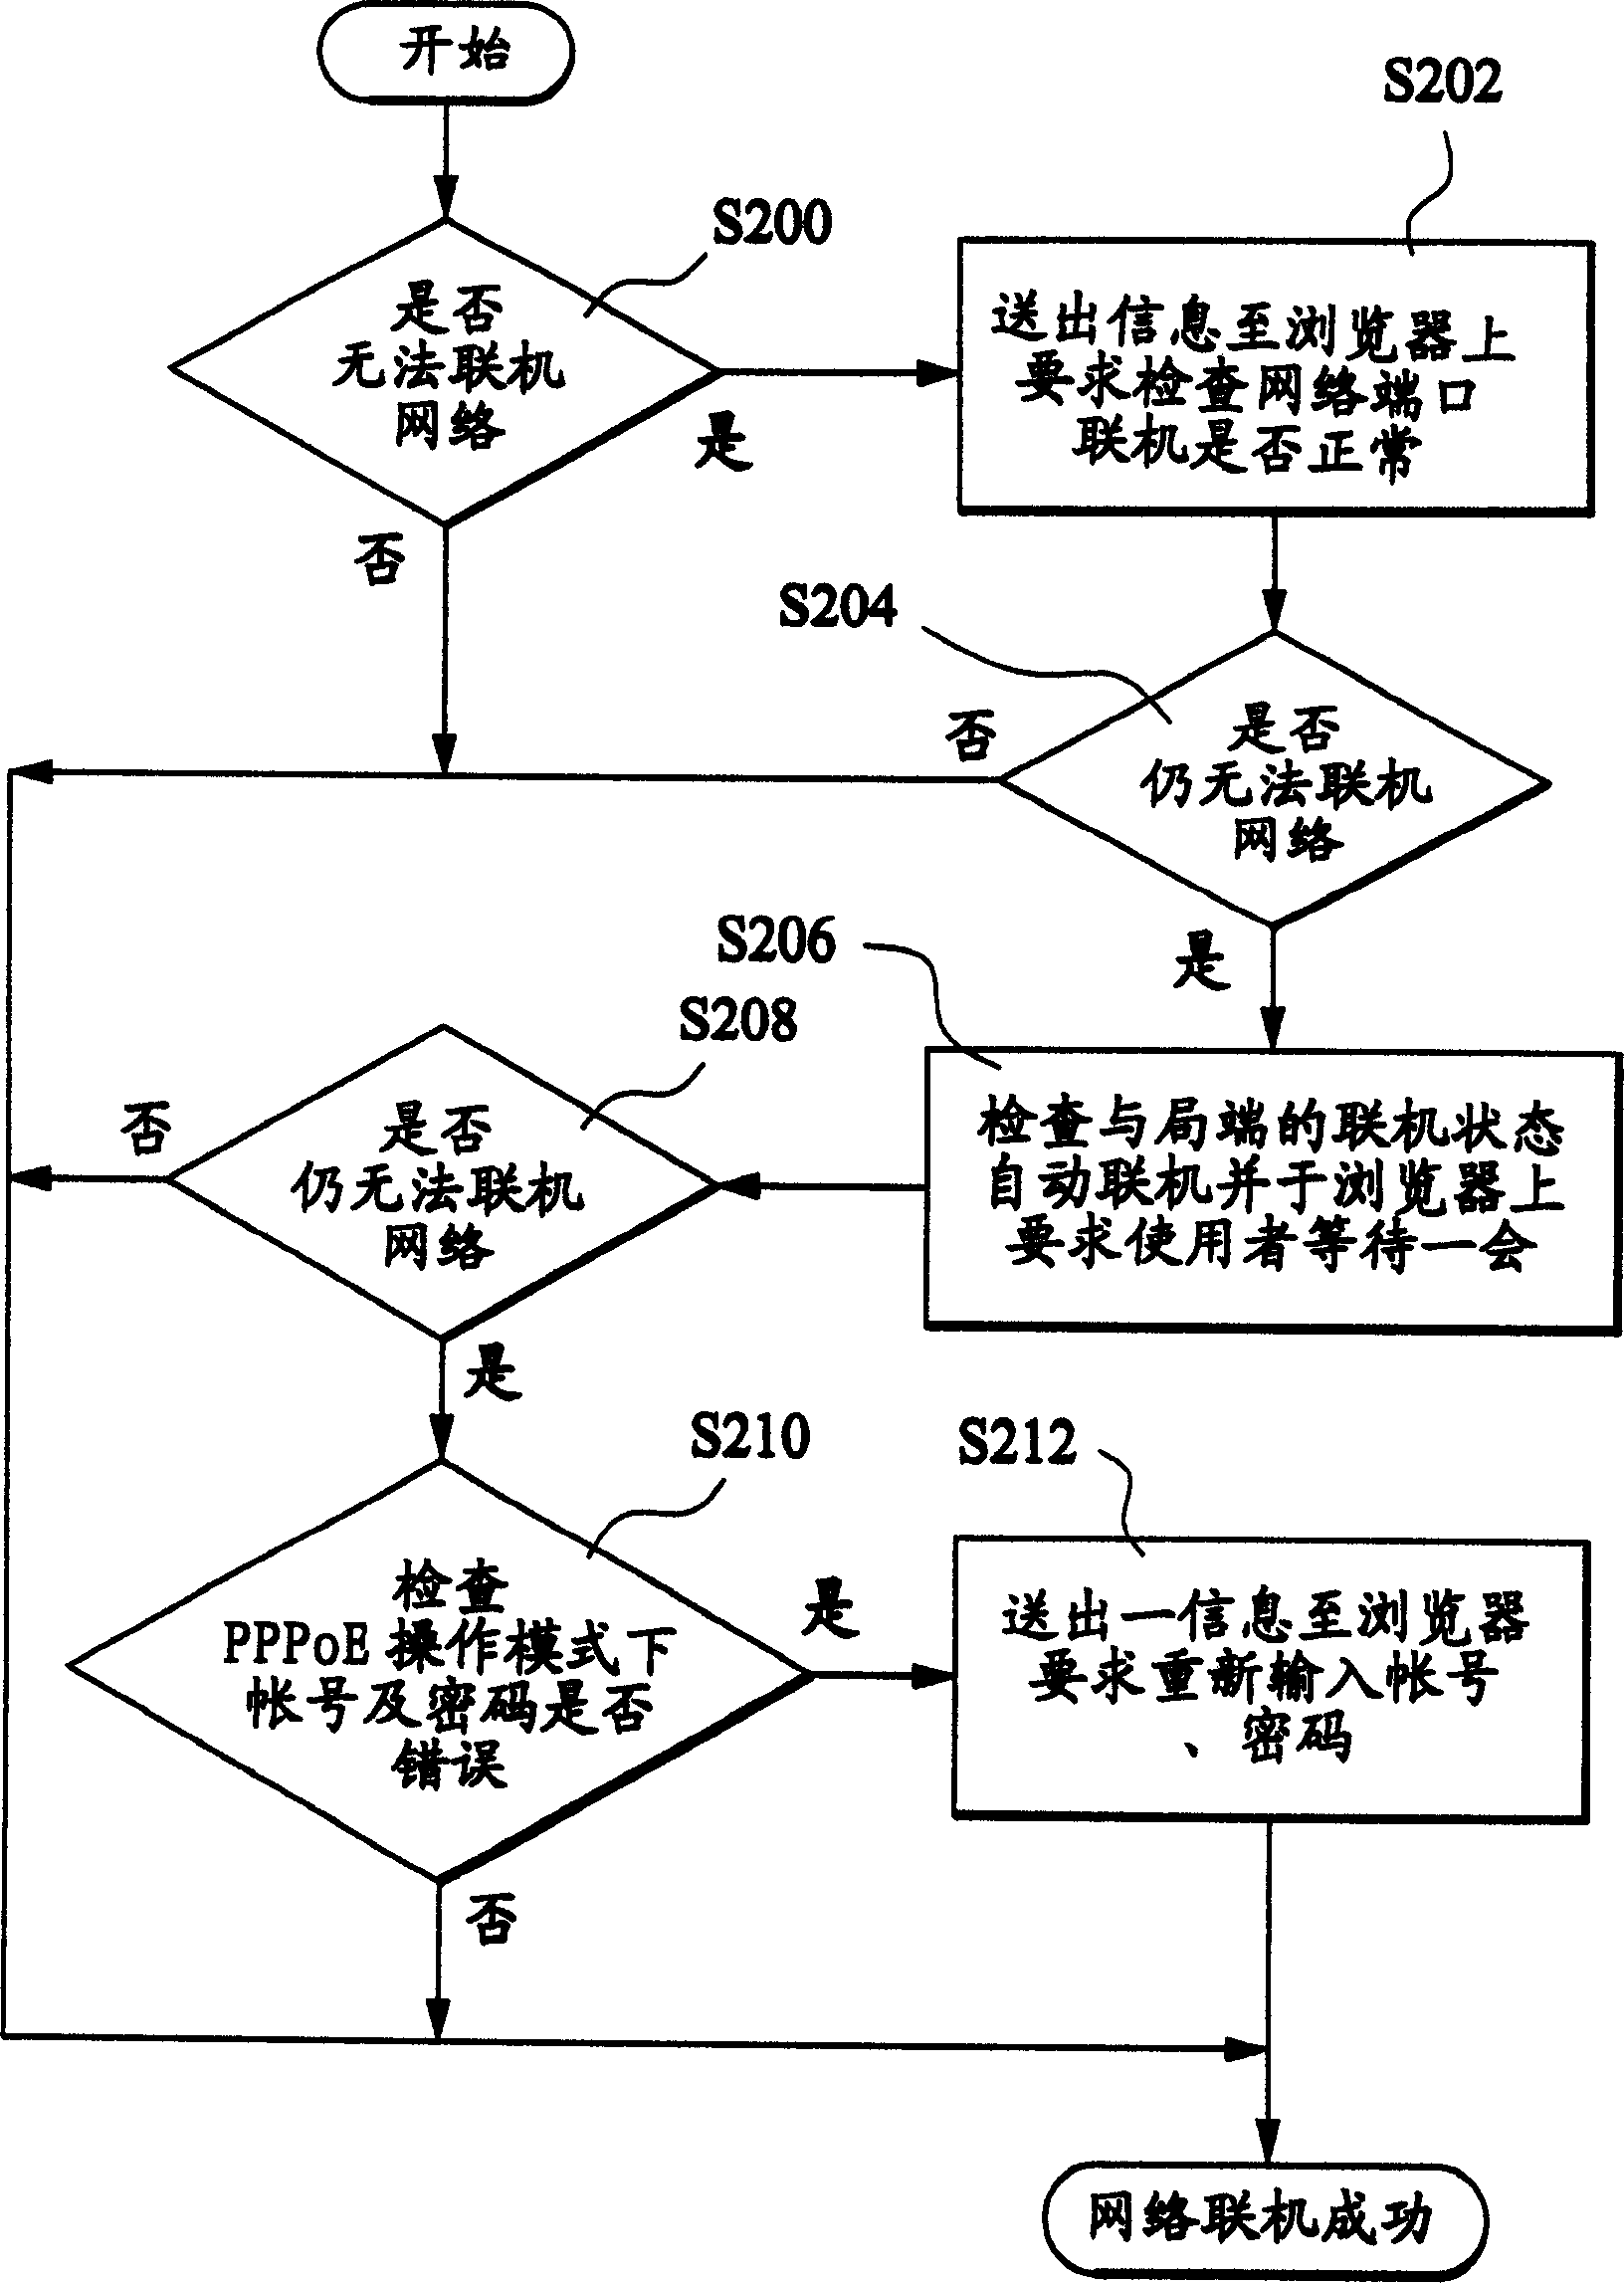 On-line method for IP configuration of set-free network